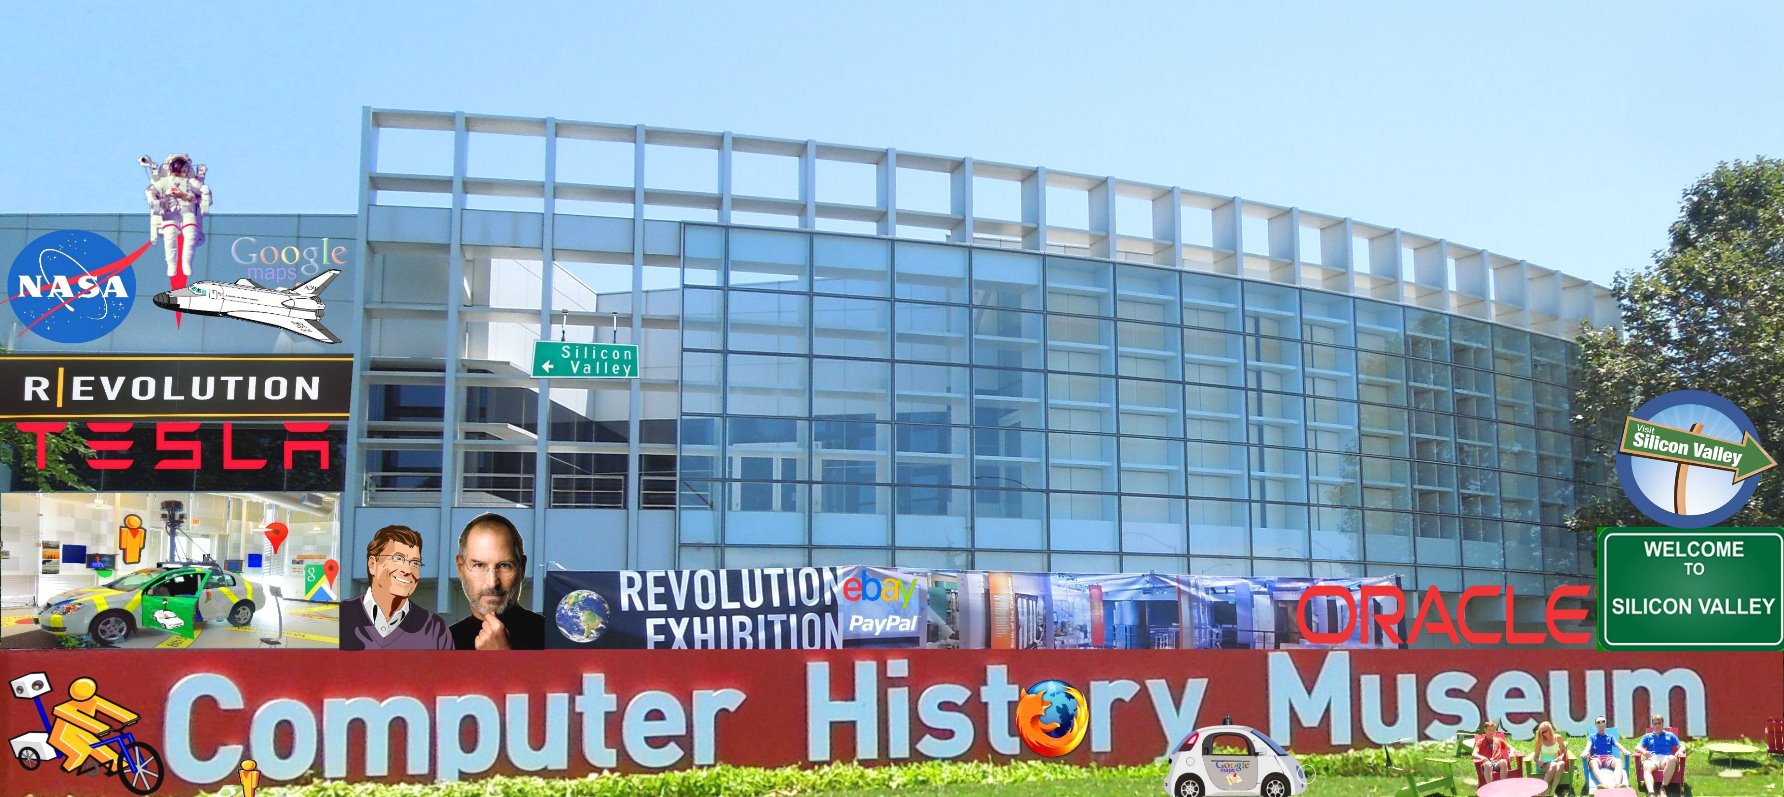 Visit the Computer History Museum in Mountain View Silicon Valley